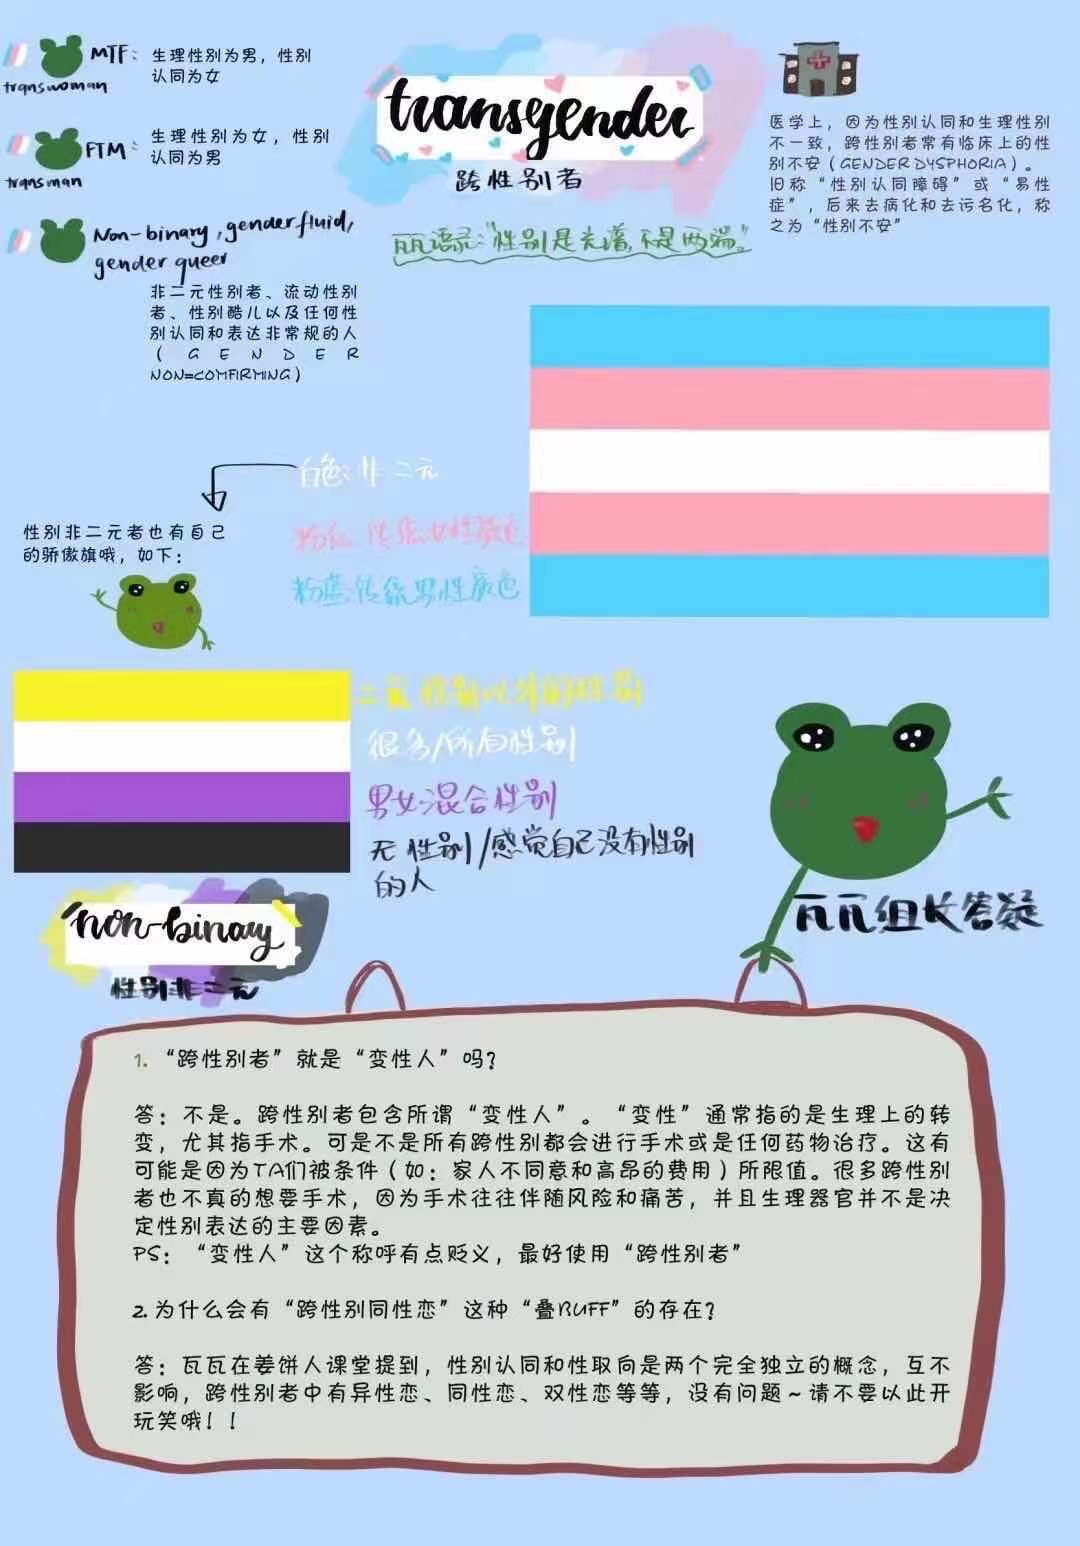 Jiyoung: In lieu of any personal photos alongside this week's episode, here are some useful LGBTQIA resources in Chinese [2].